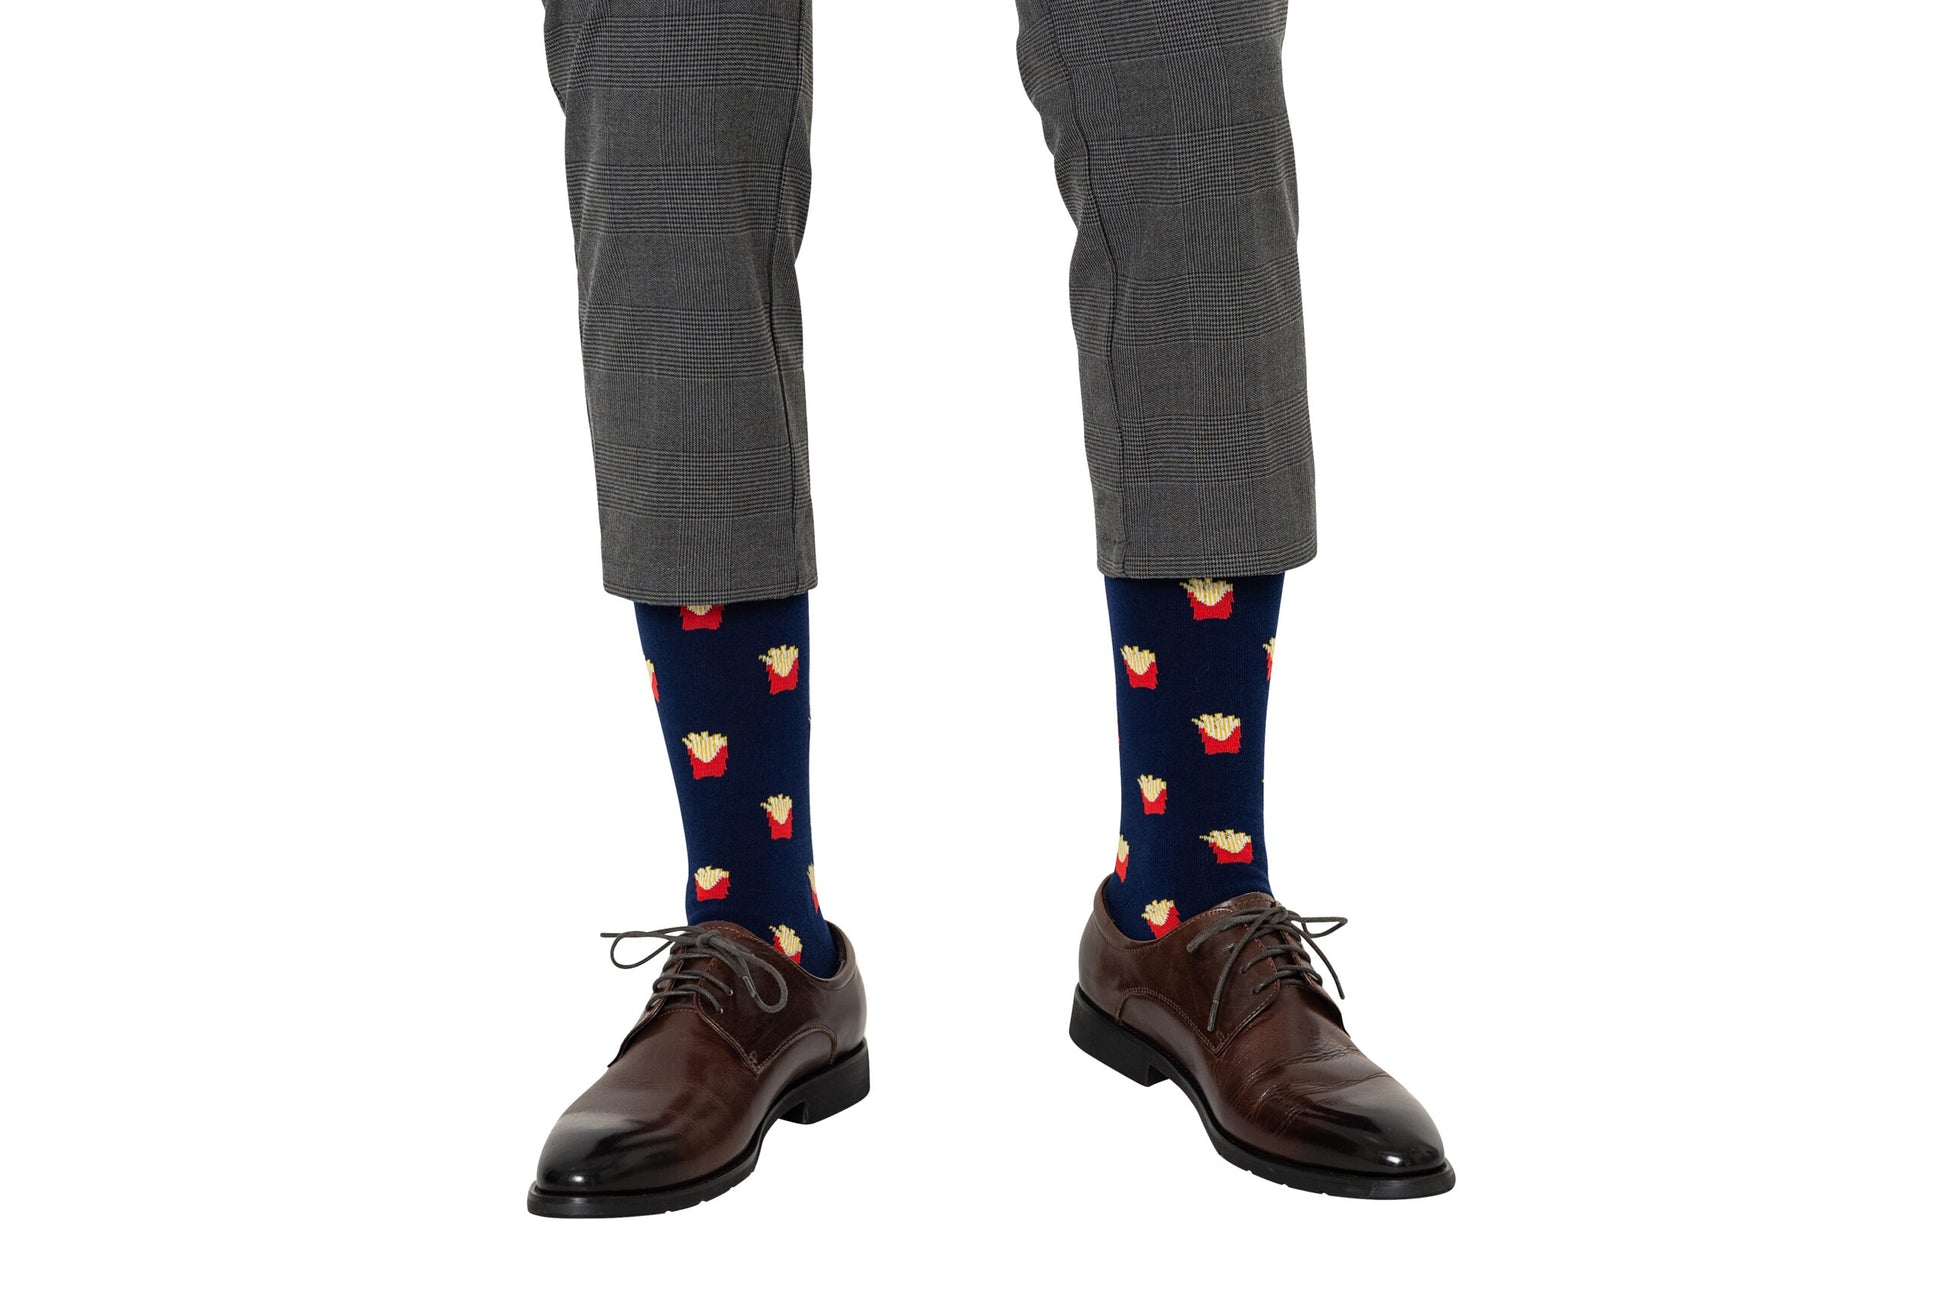 A man wearing a pair of Fries socks.